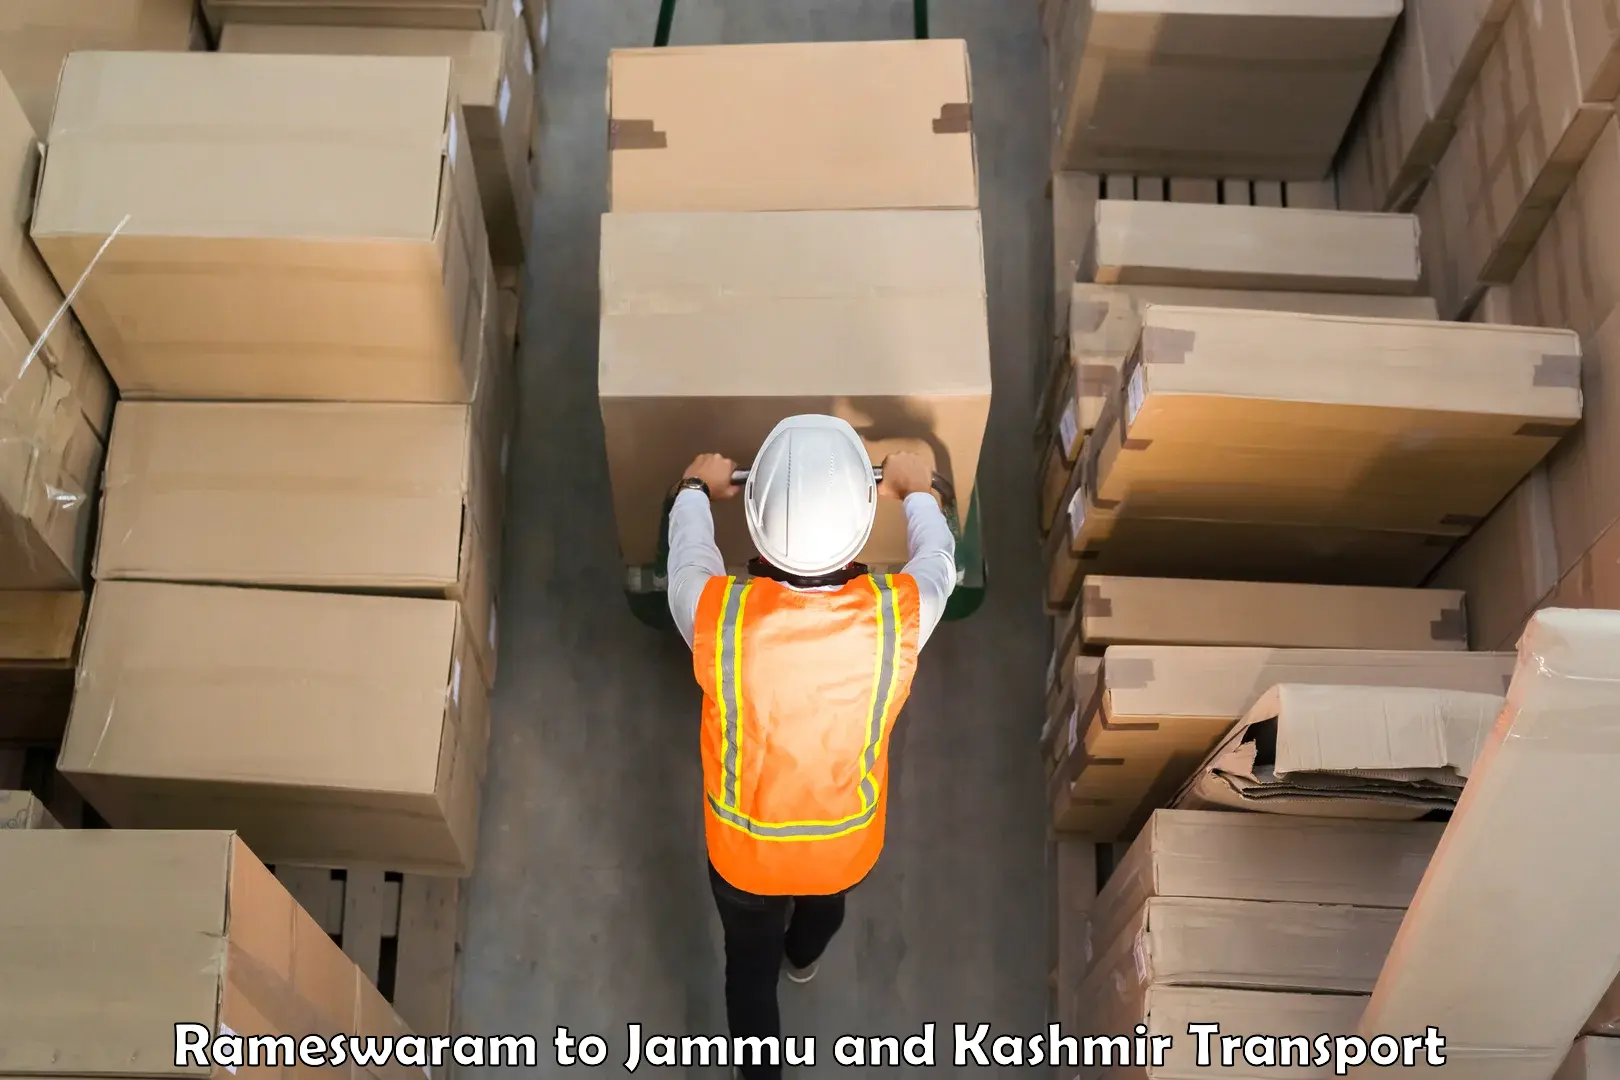 Goods delivery service Rameswaram to Pulwama